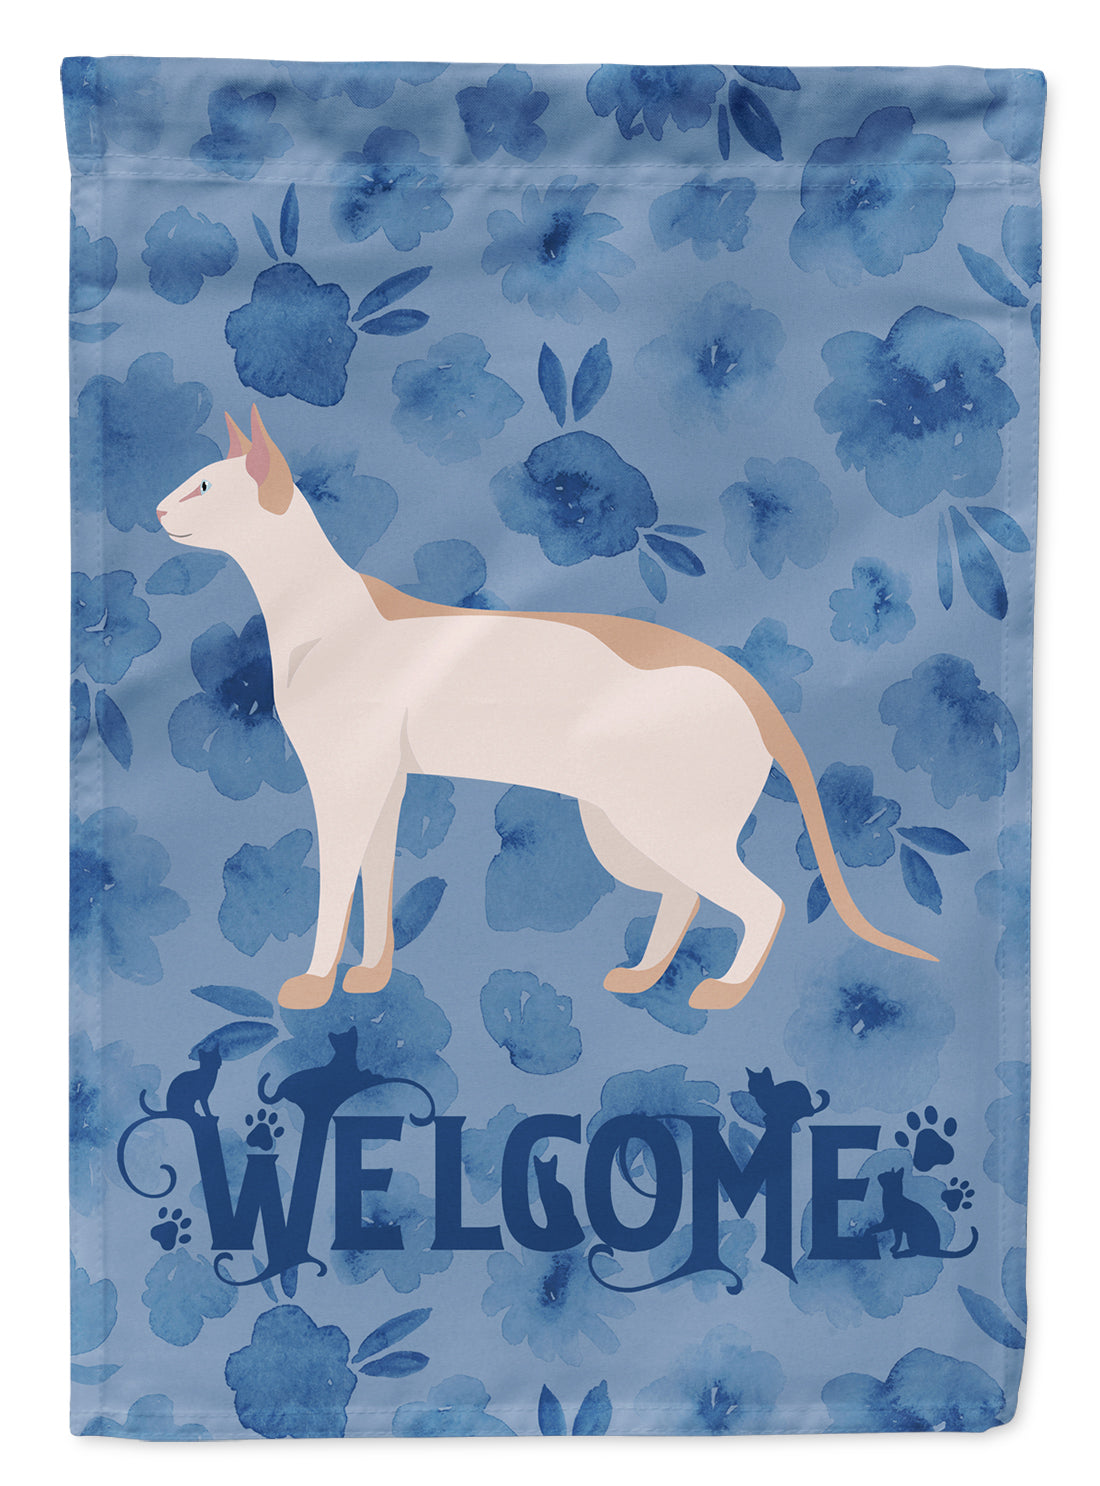 Colorpoint Shorthair #3 Cat Welcome Flag Garden Size CK4862GF